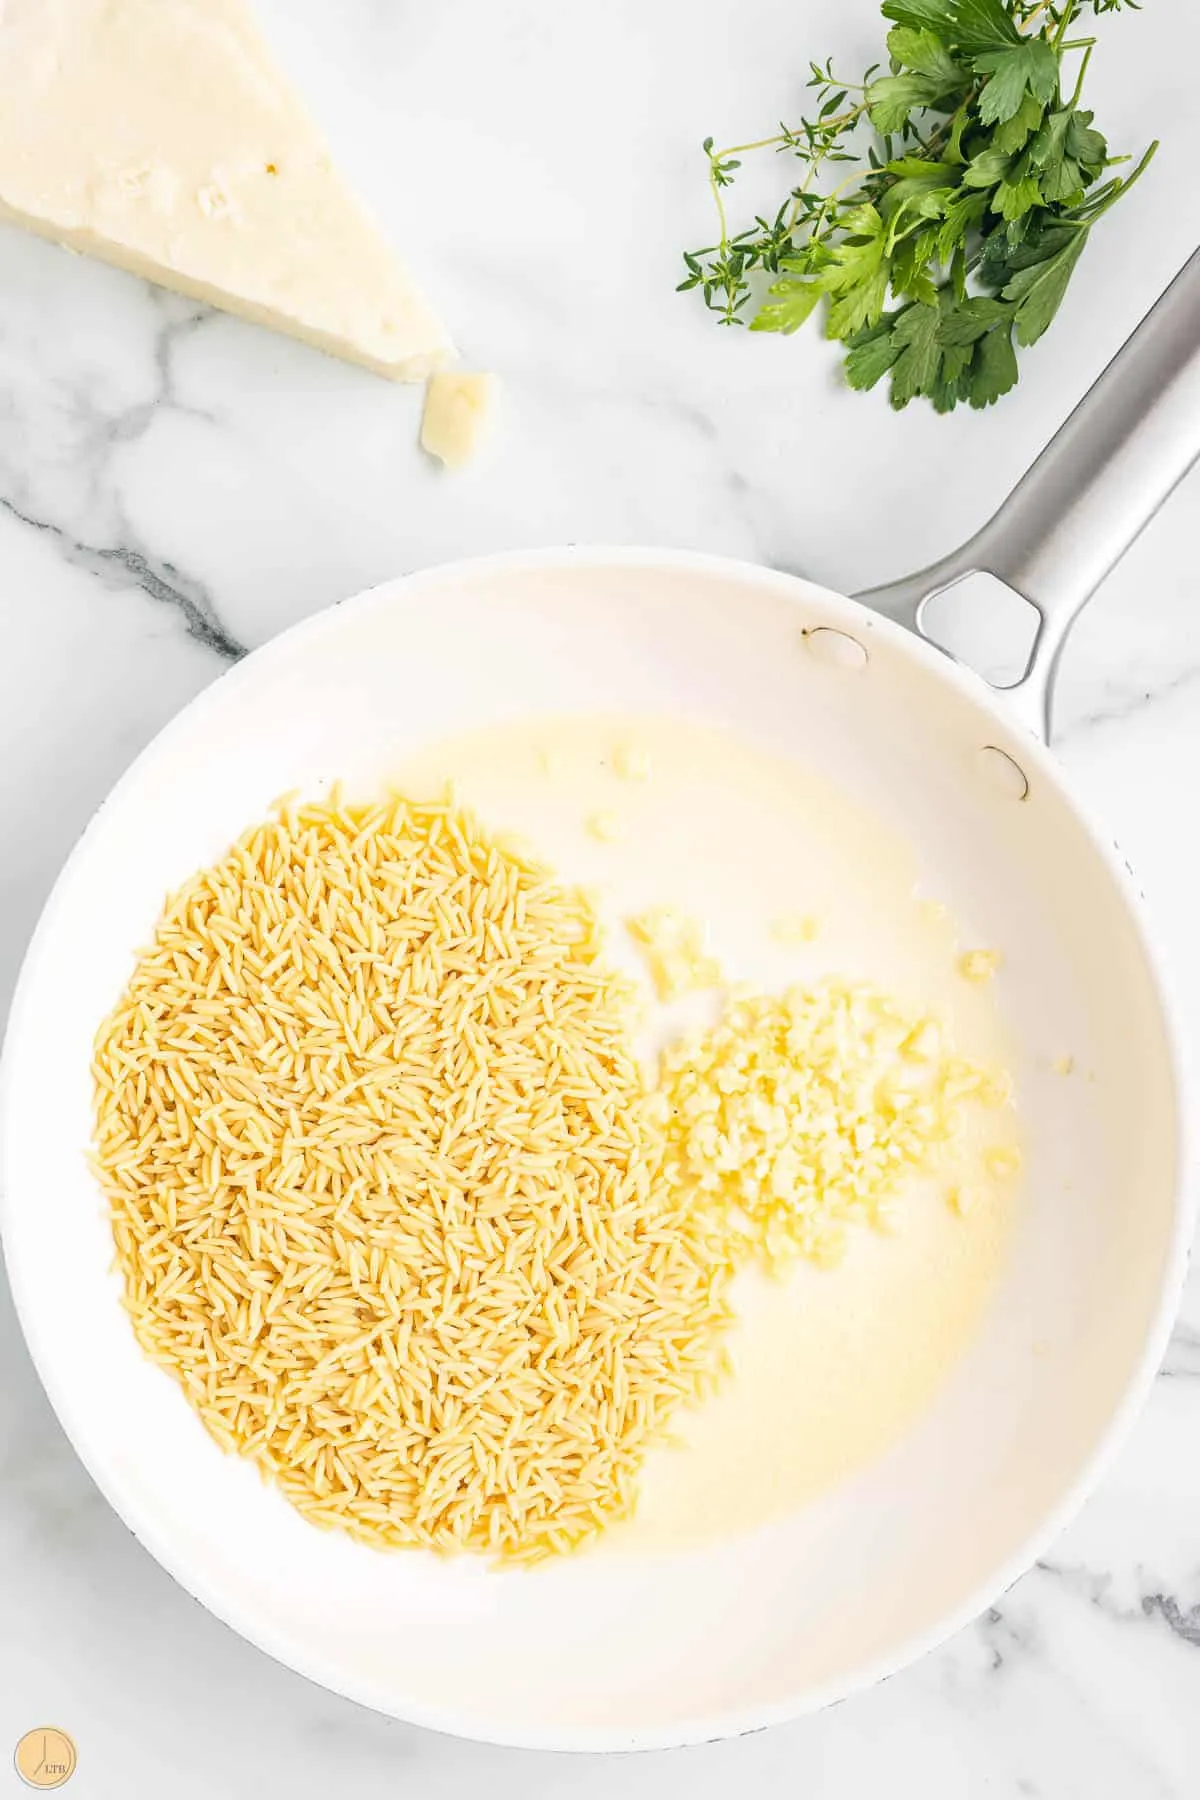 orzo and garlic in a pan